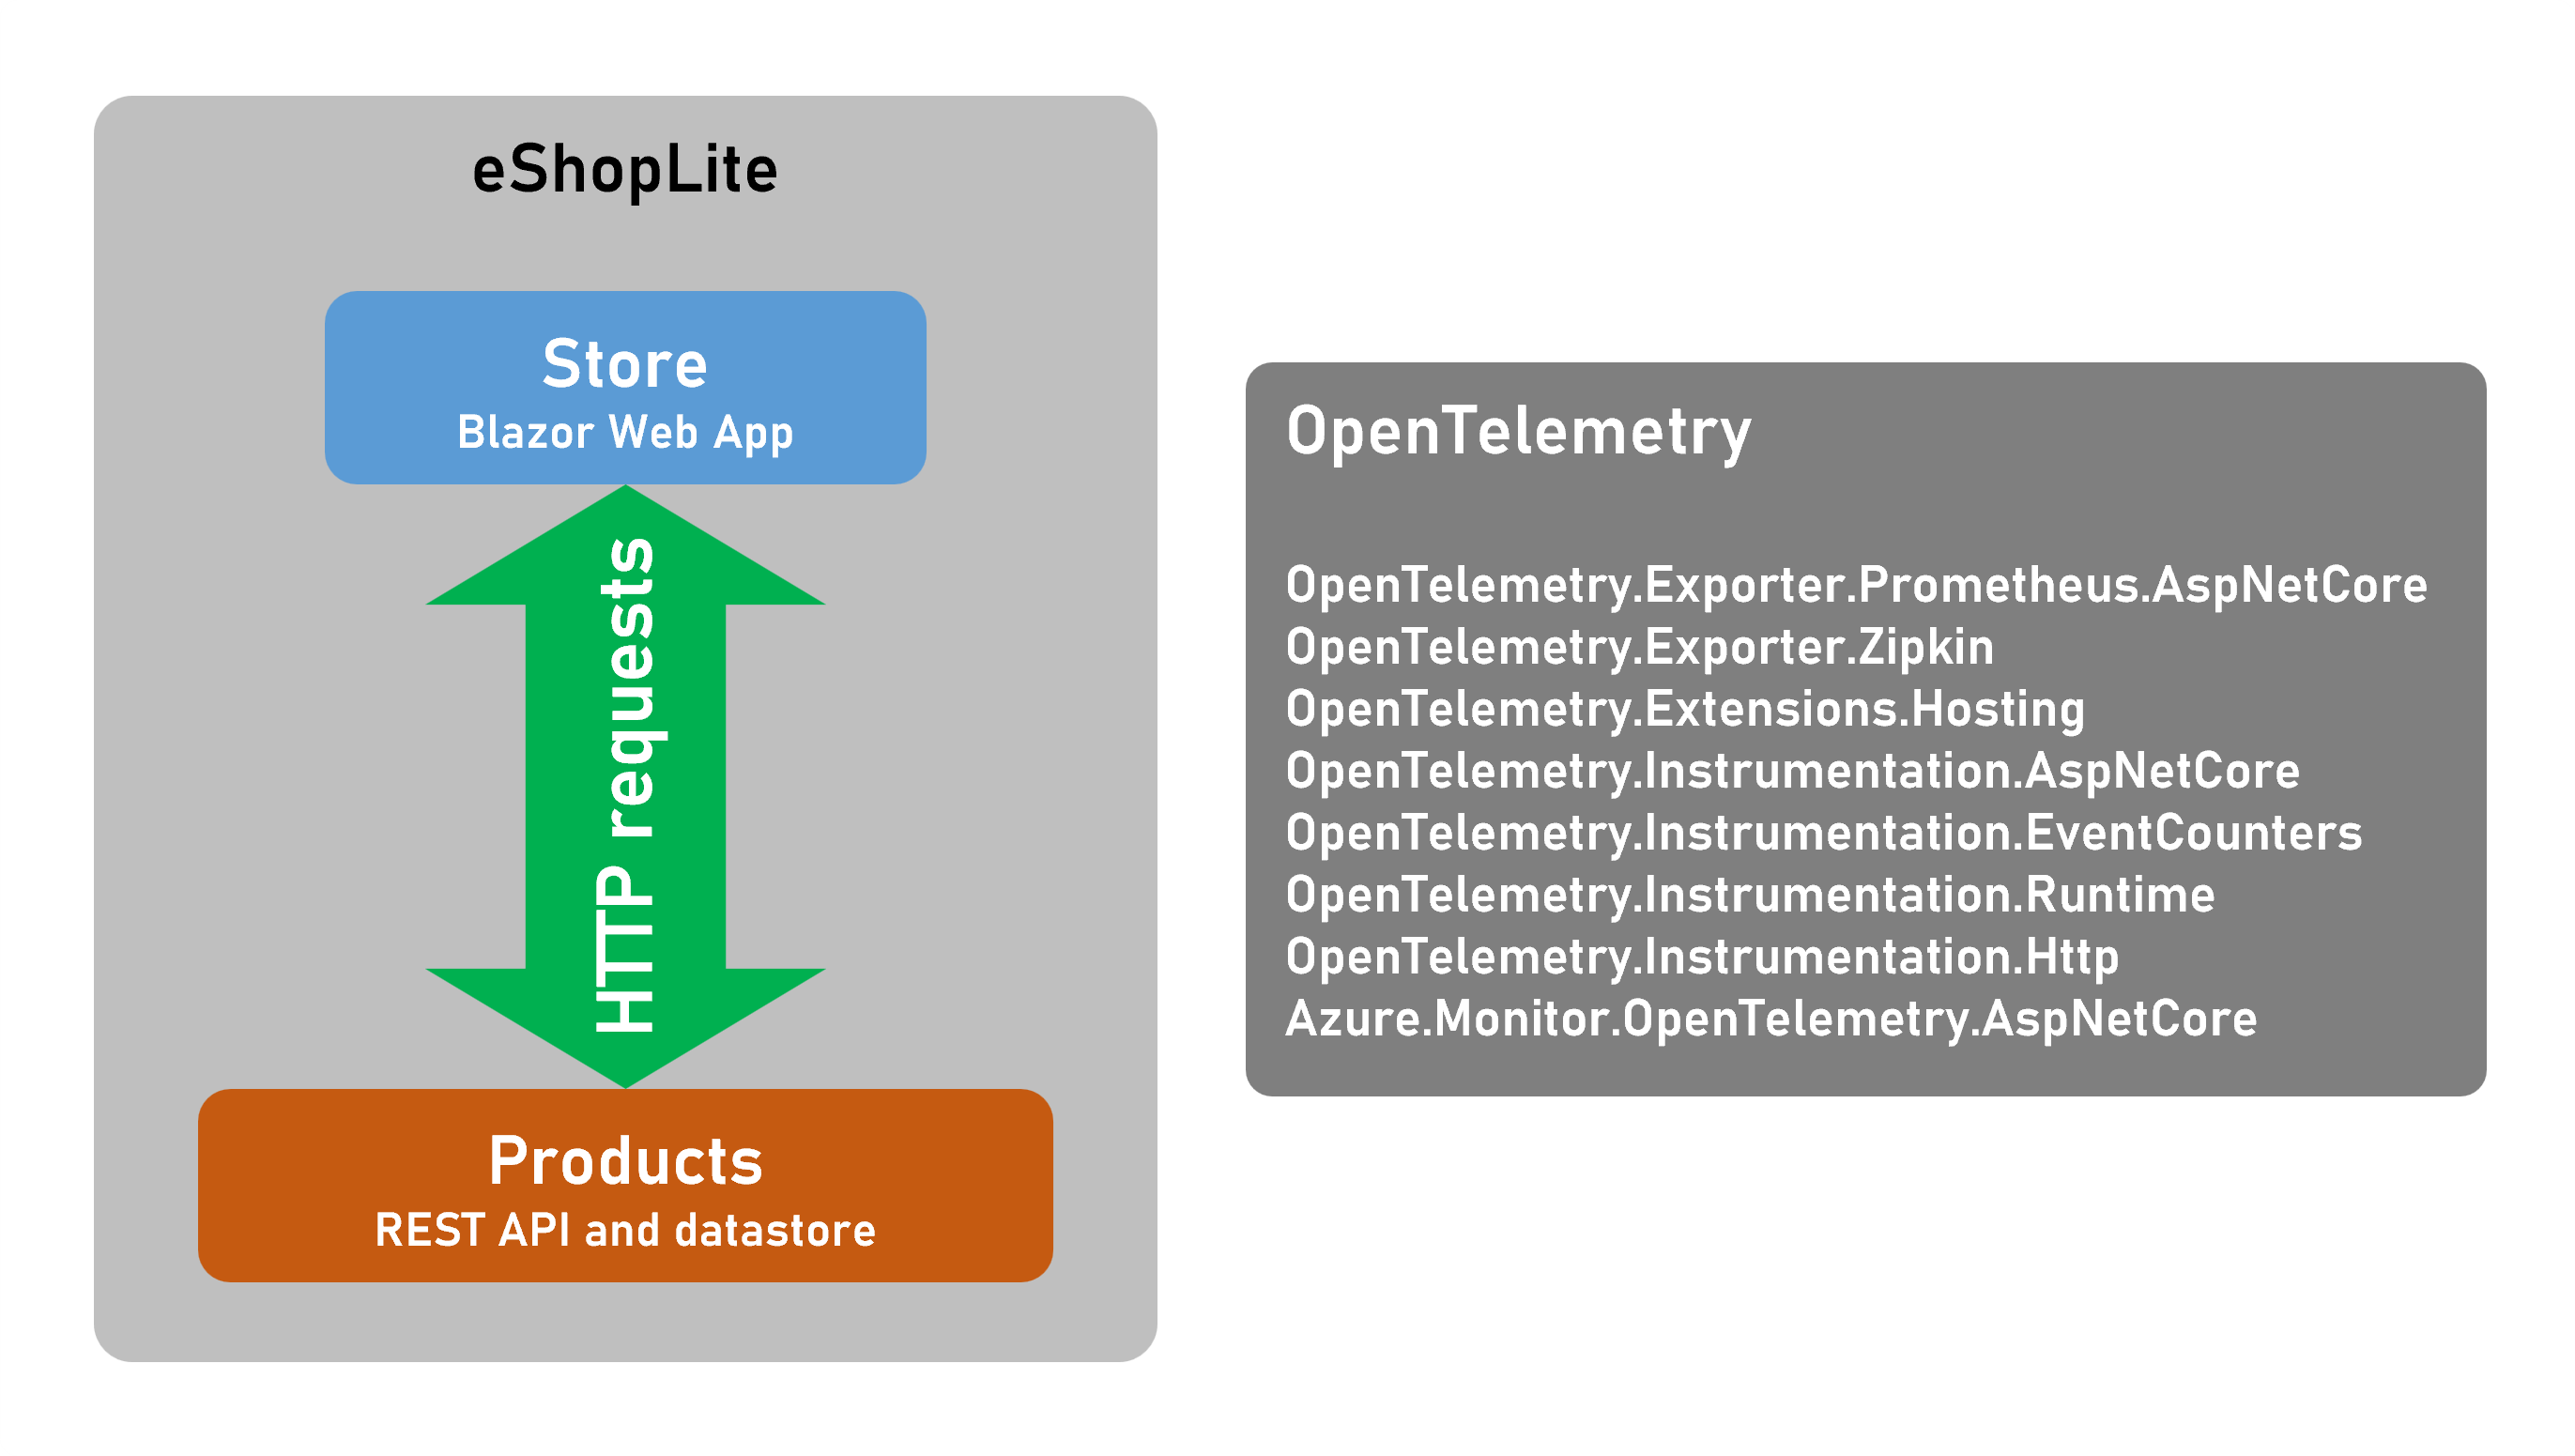 A diagram that shows the different OpenTelemetry components of the app.